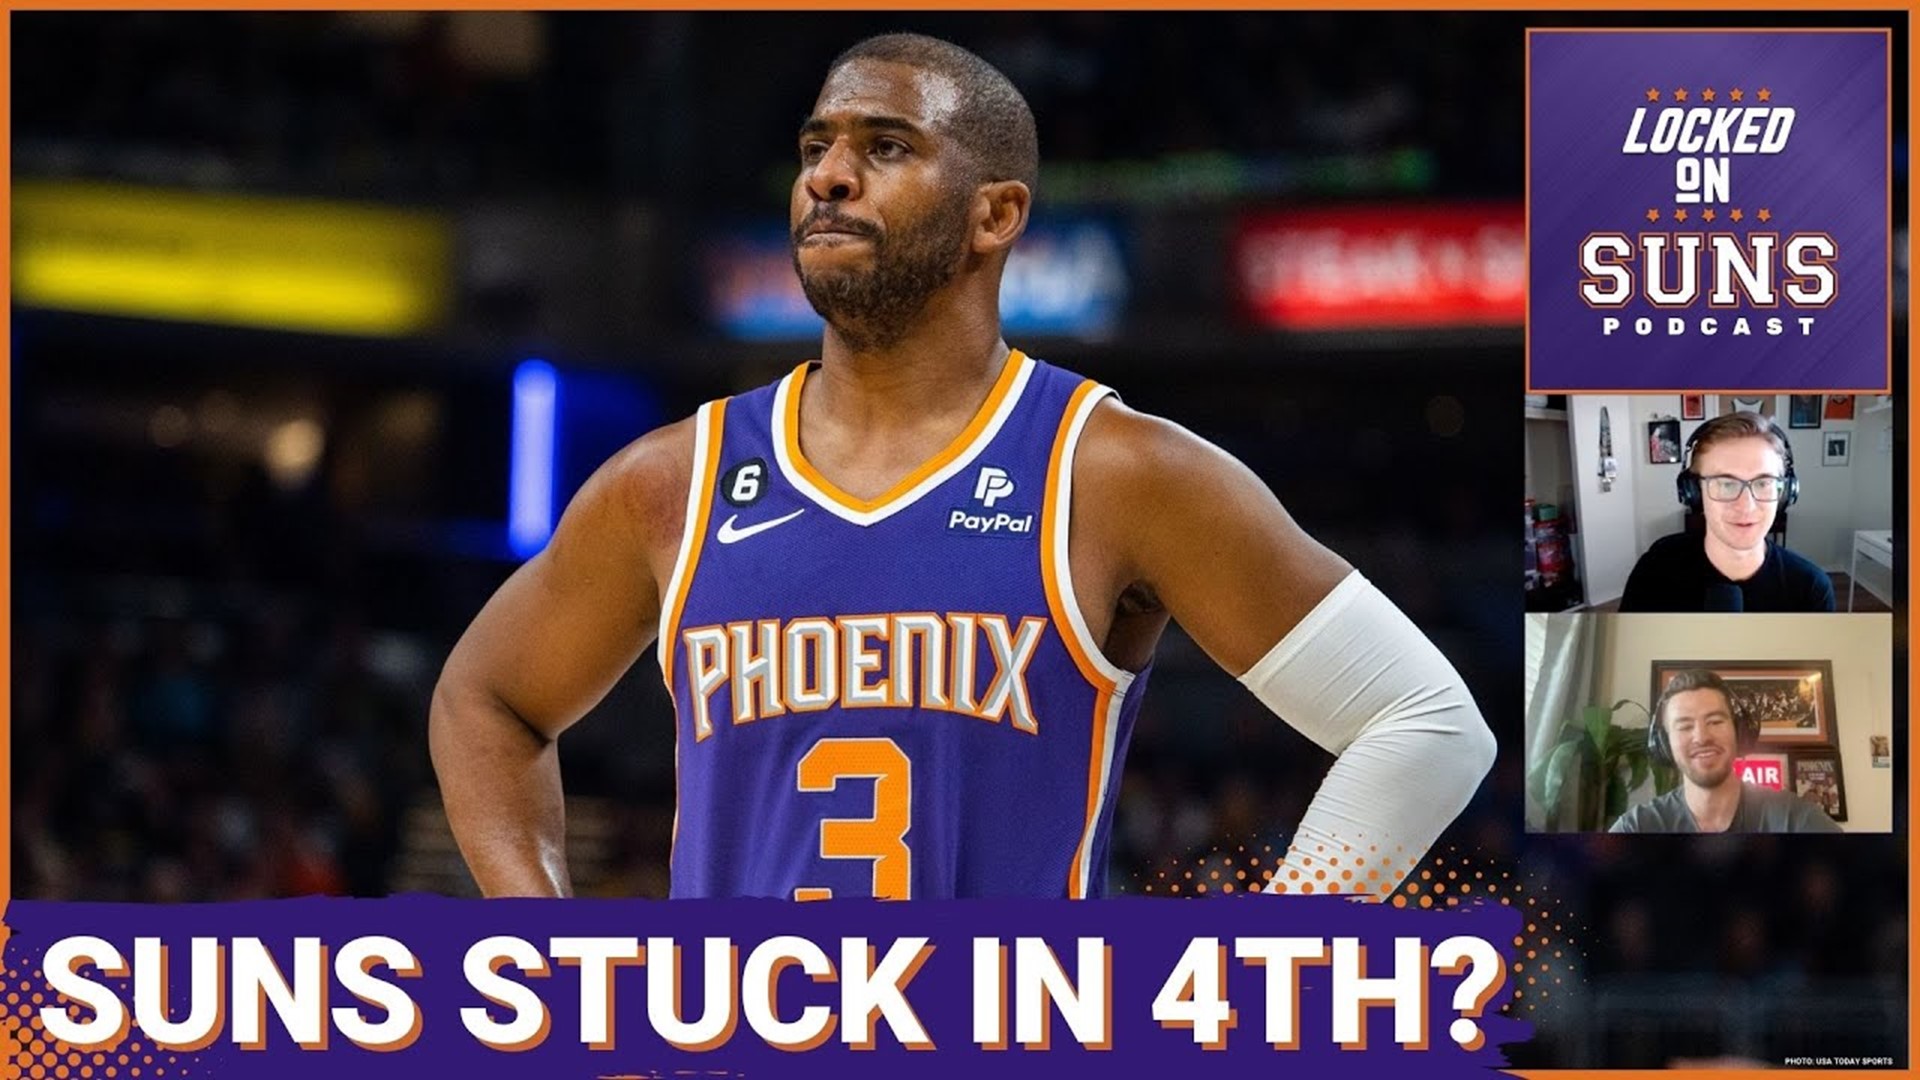 The Phoenix Suns were outplayed by the Kings on Saturday night and might be stuck in the four seed, but there's good news on Kevin Durant.